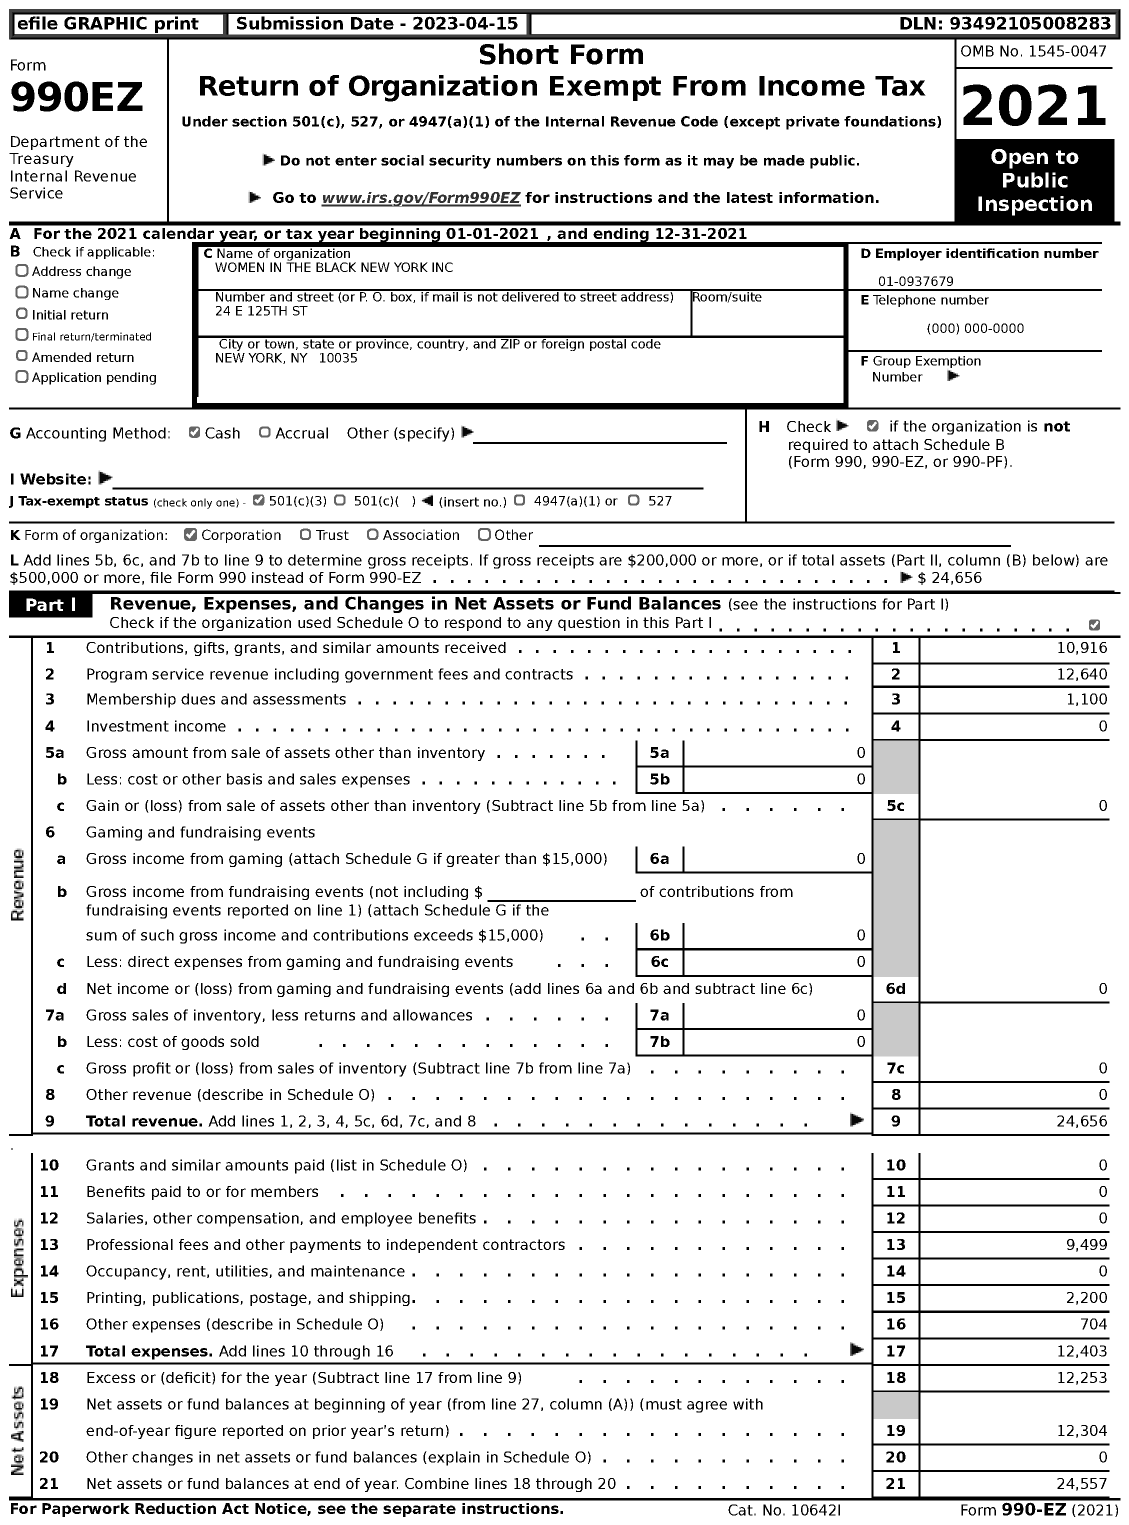 Image of first page of 2021 Form 990EZ for Women in the Black New York